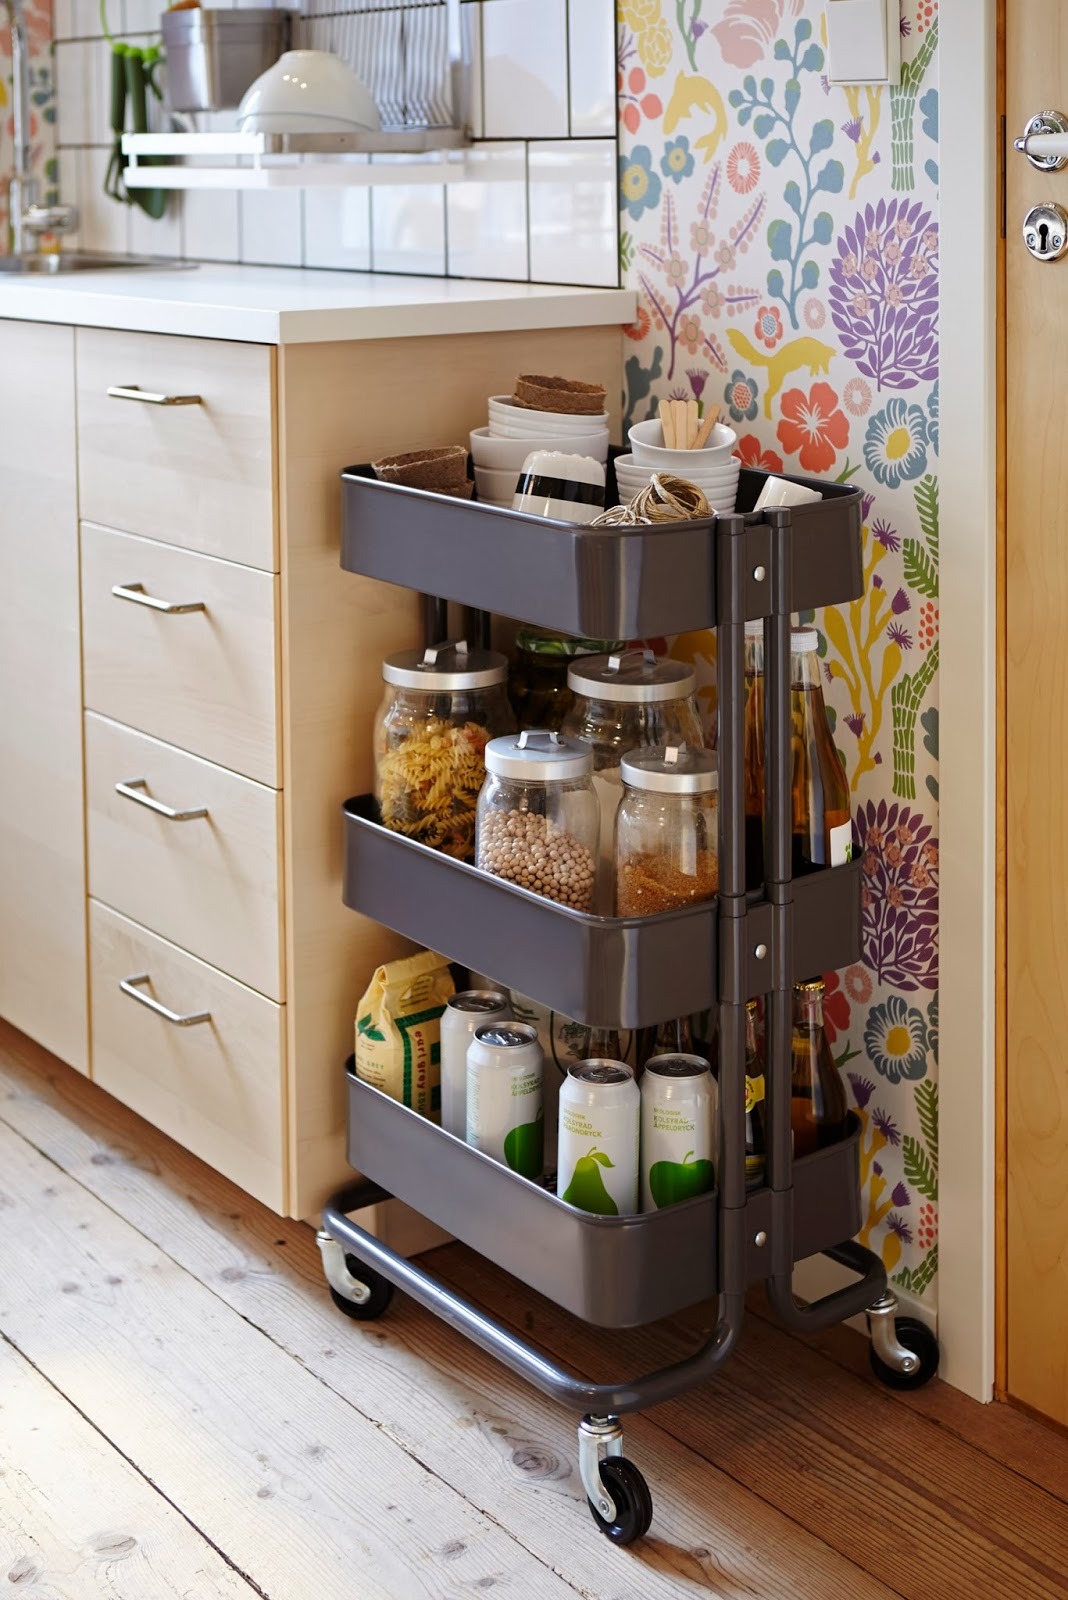 My ideal home — RÅSKOG cart by Ikea, with floral wallpaper